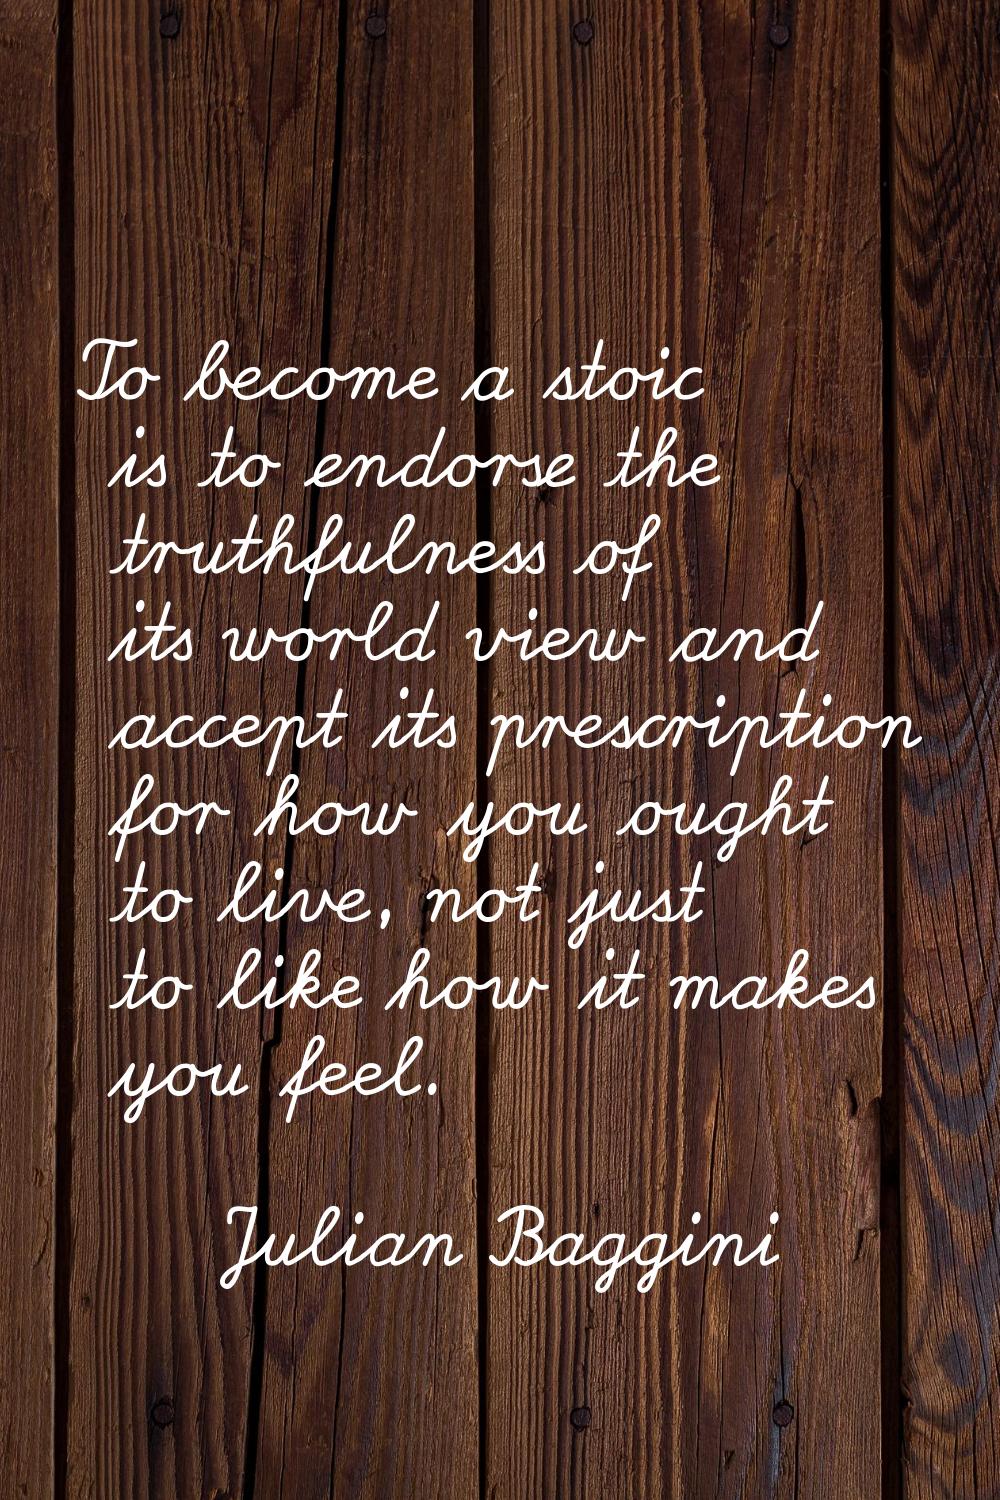 To become a stoic is to endorse the truthfulness of its world view and accept its prescription for 